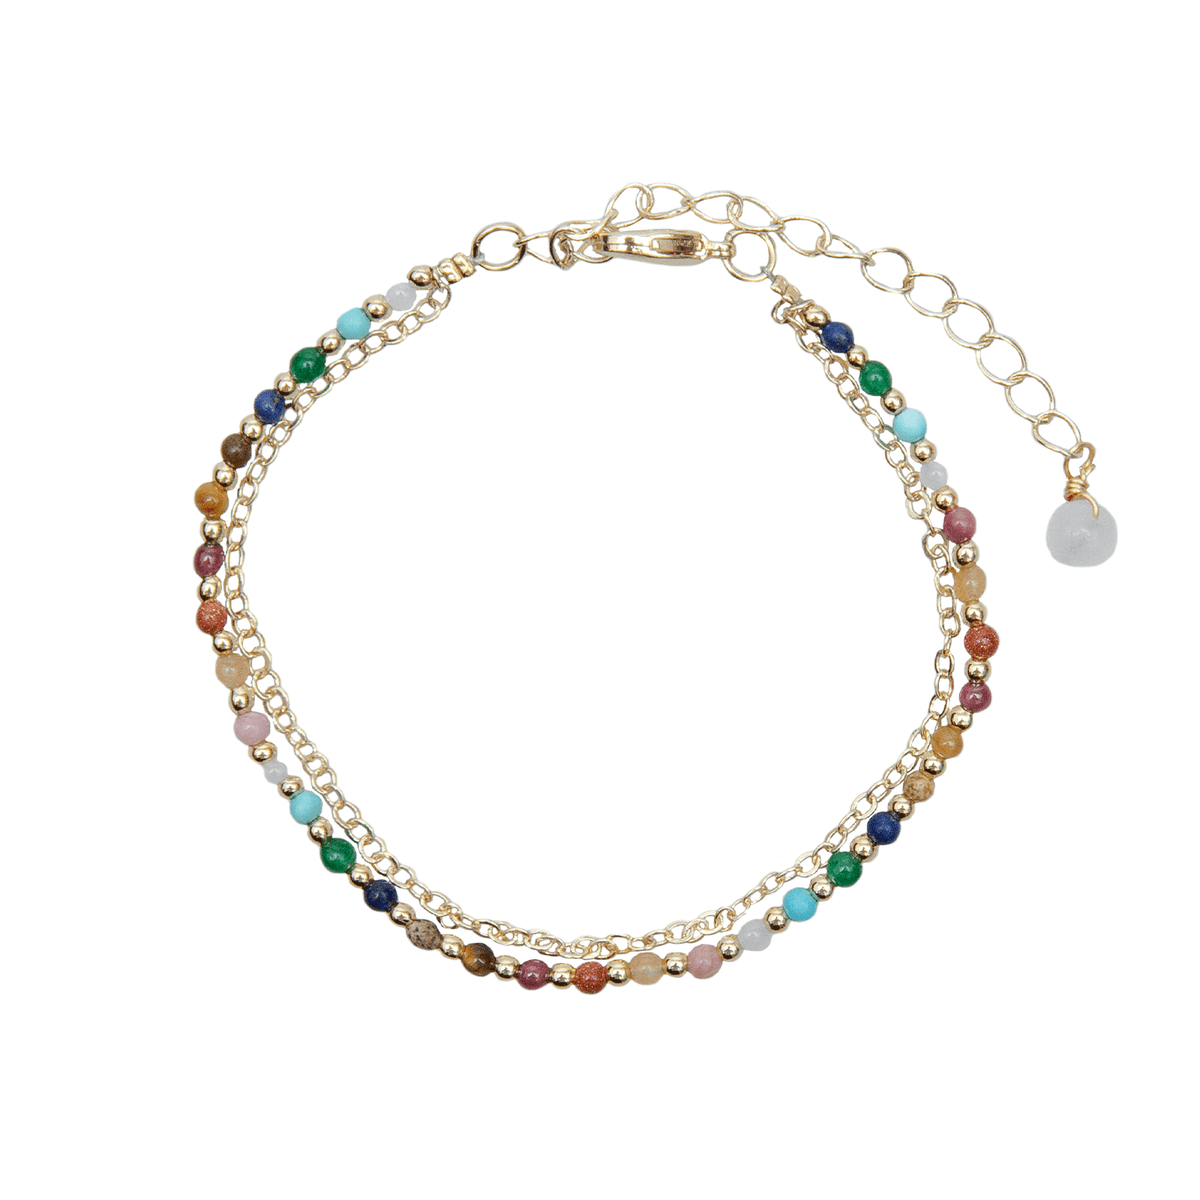 2mm multicolor stone and gold bead healing bracelet with a dainty gold chain bracelet attached